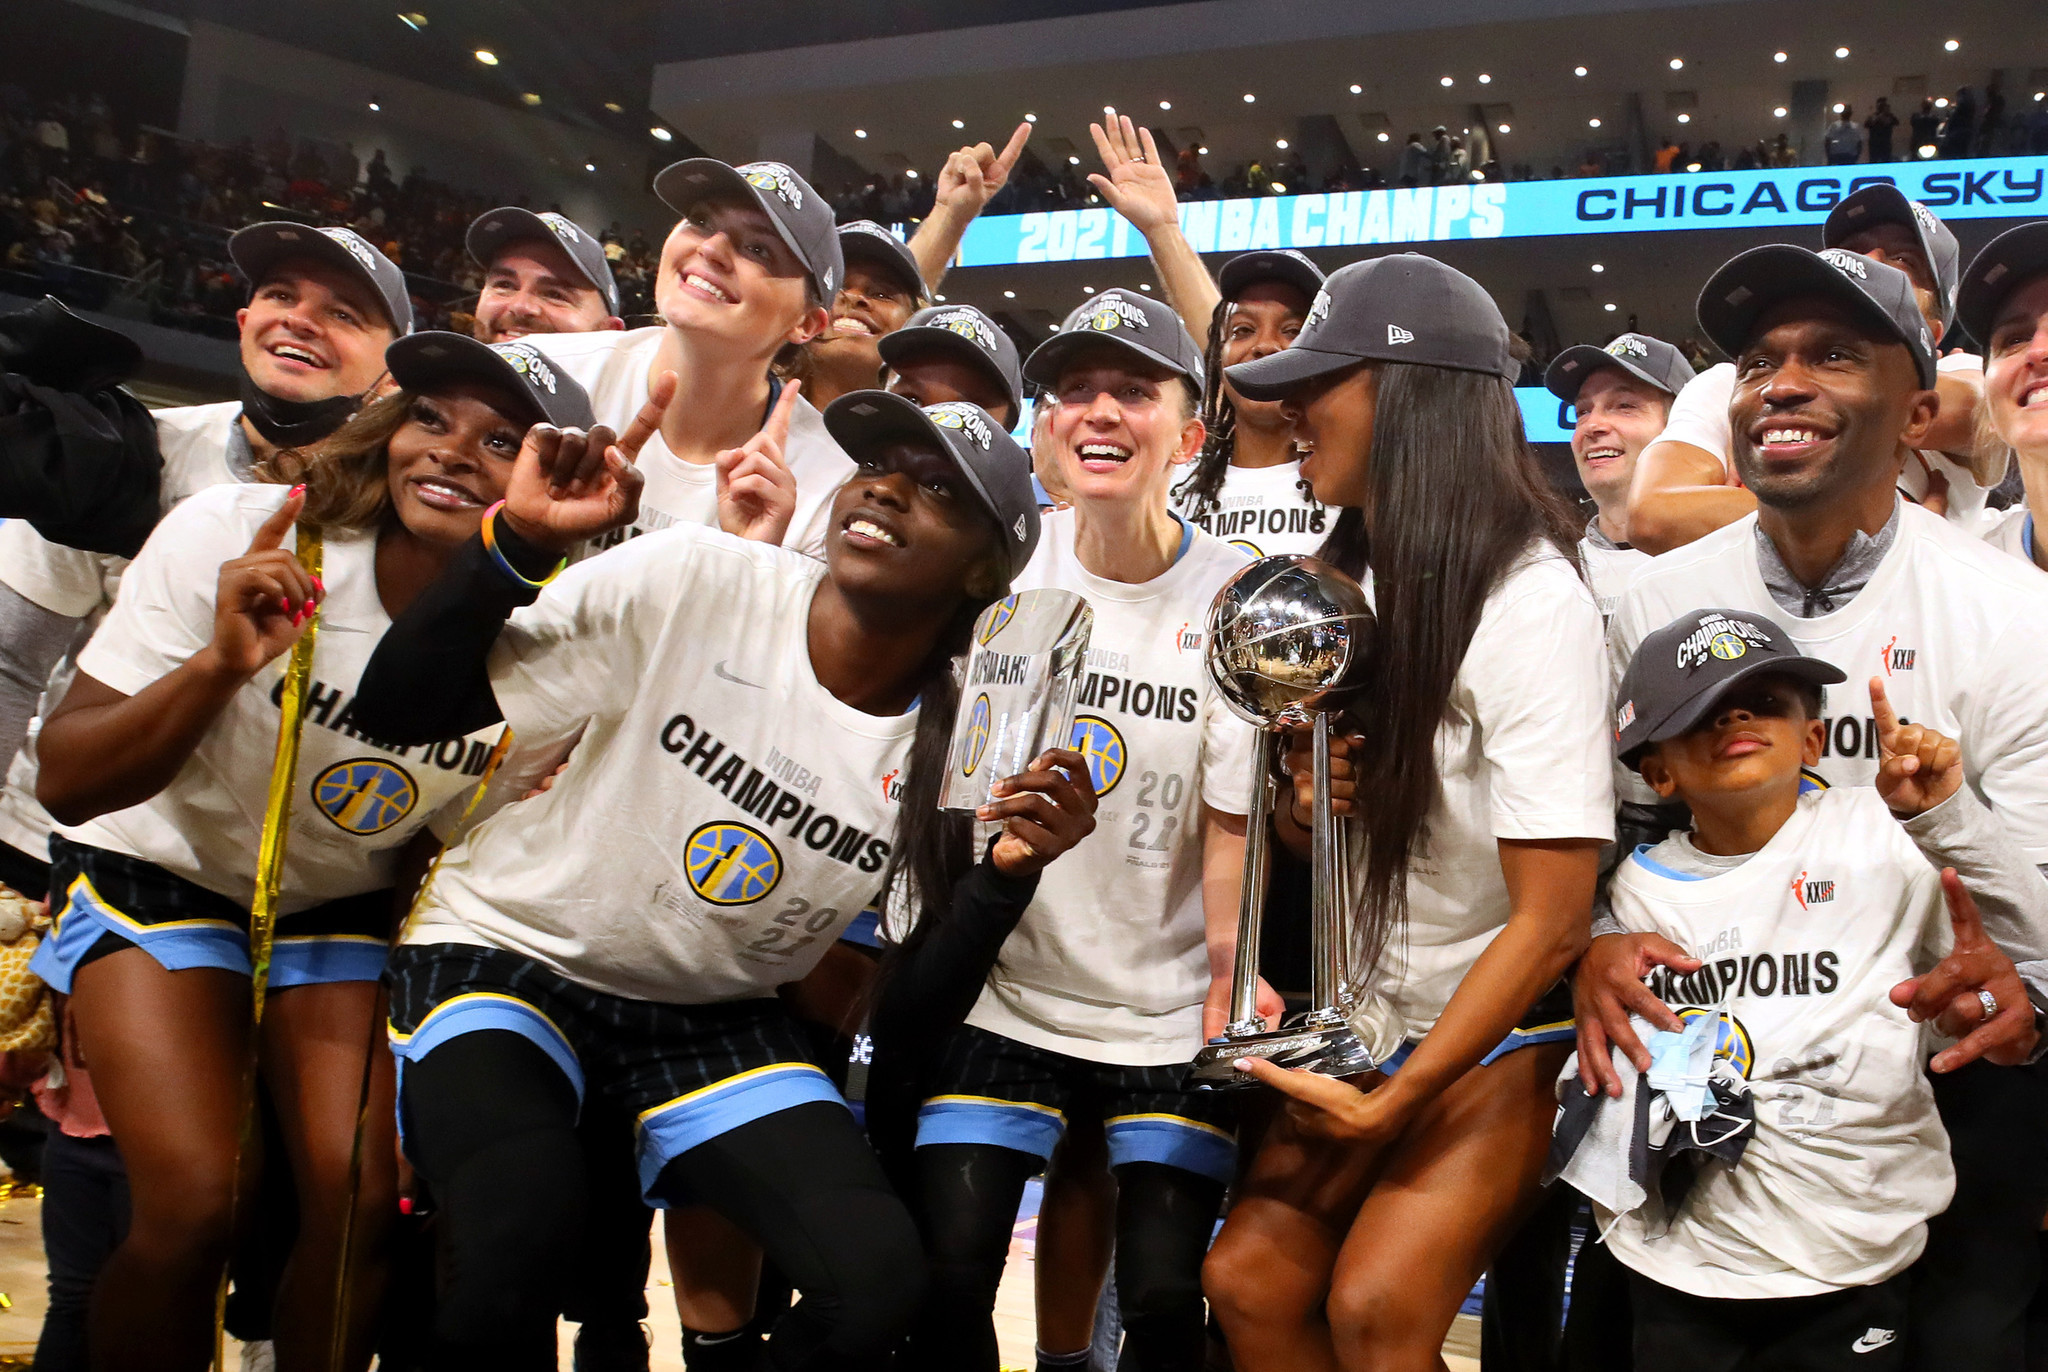 WNBA on X: 🏆 CHAMPIONS 🏆 For the first time in franchise history, the @ chicagosky are #WNBA champs! #WNBAFinals presented by @TV   / X